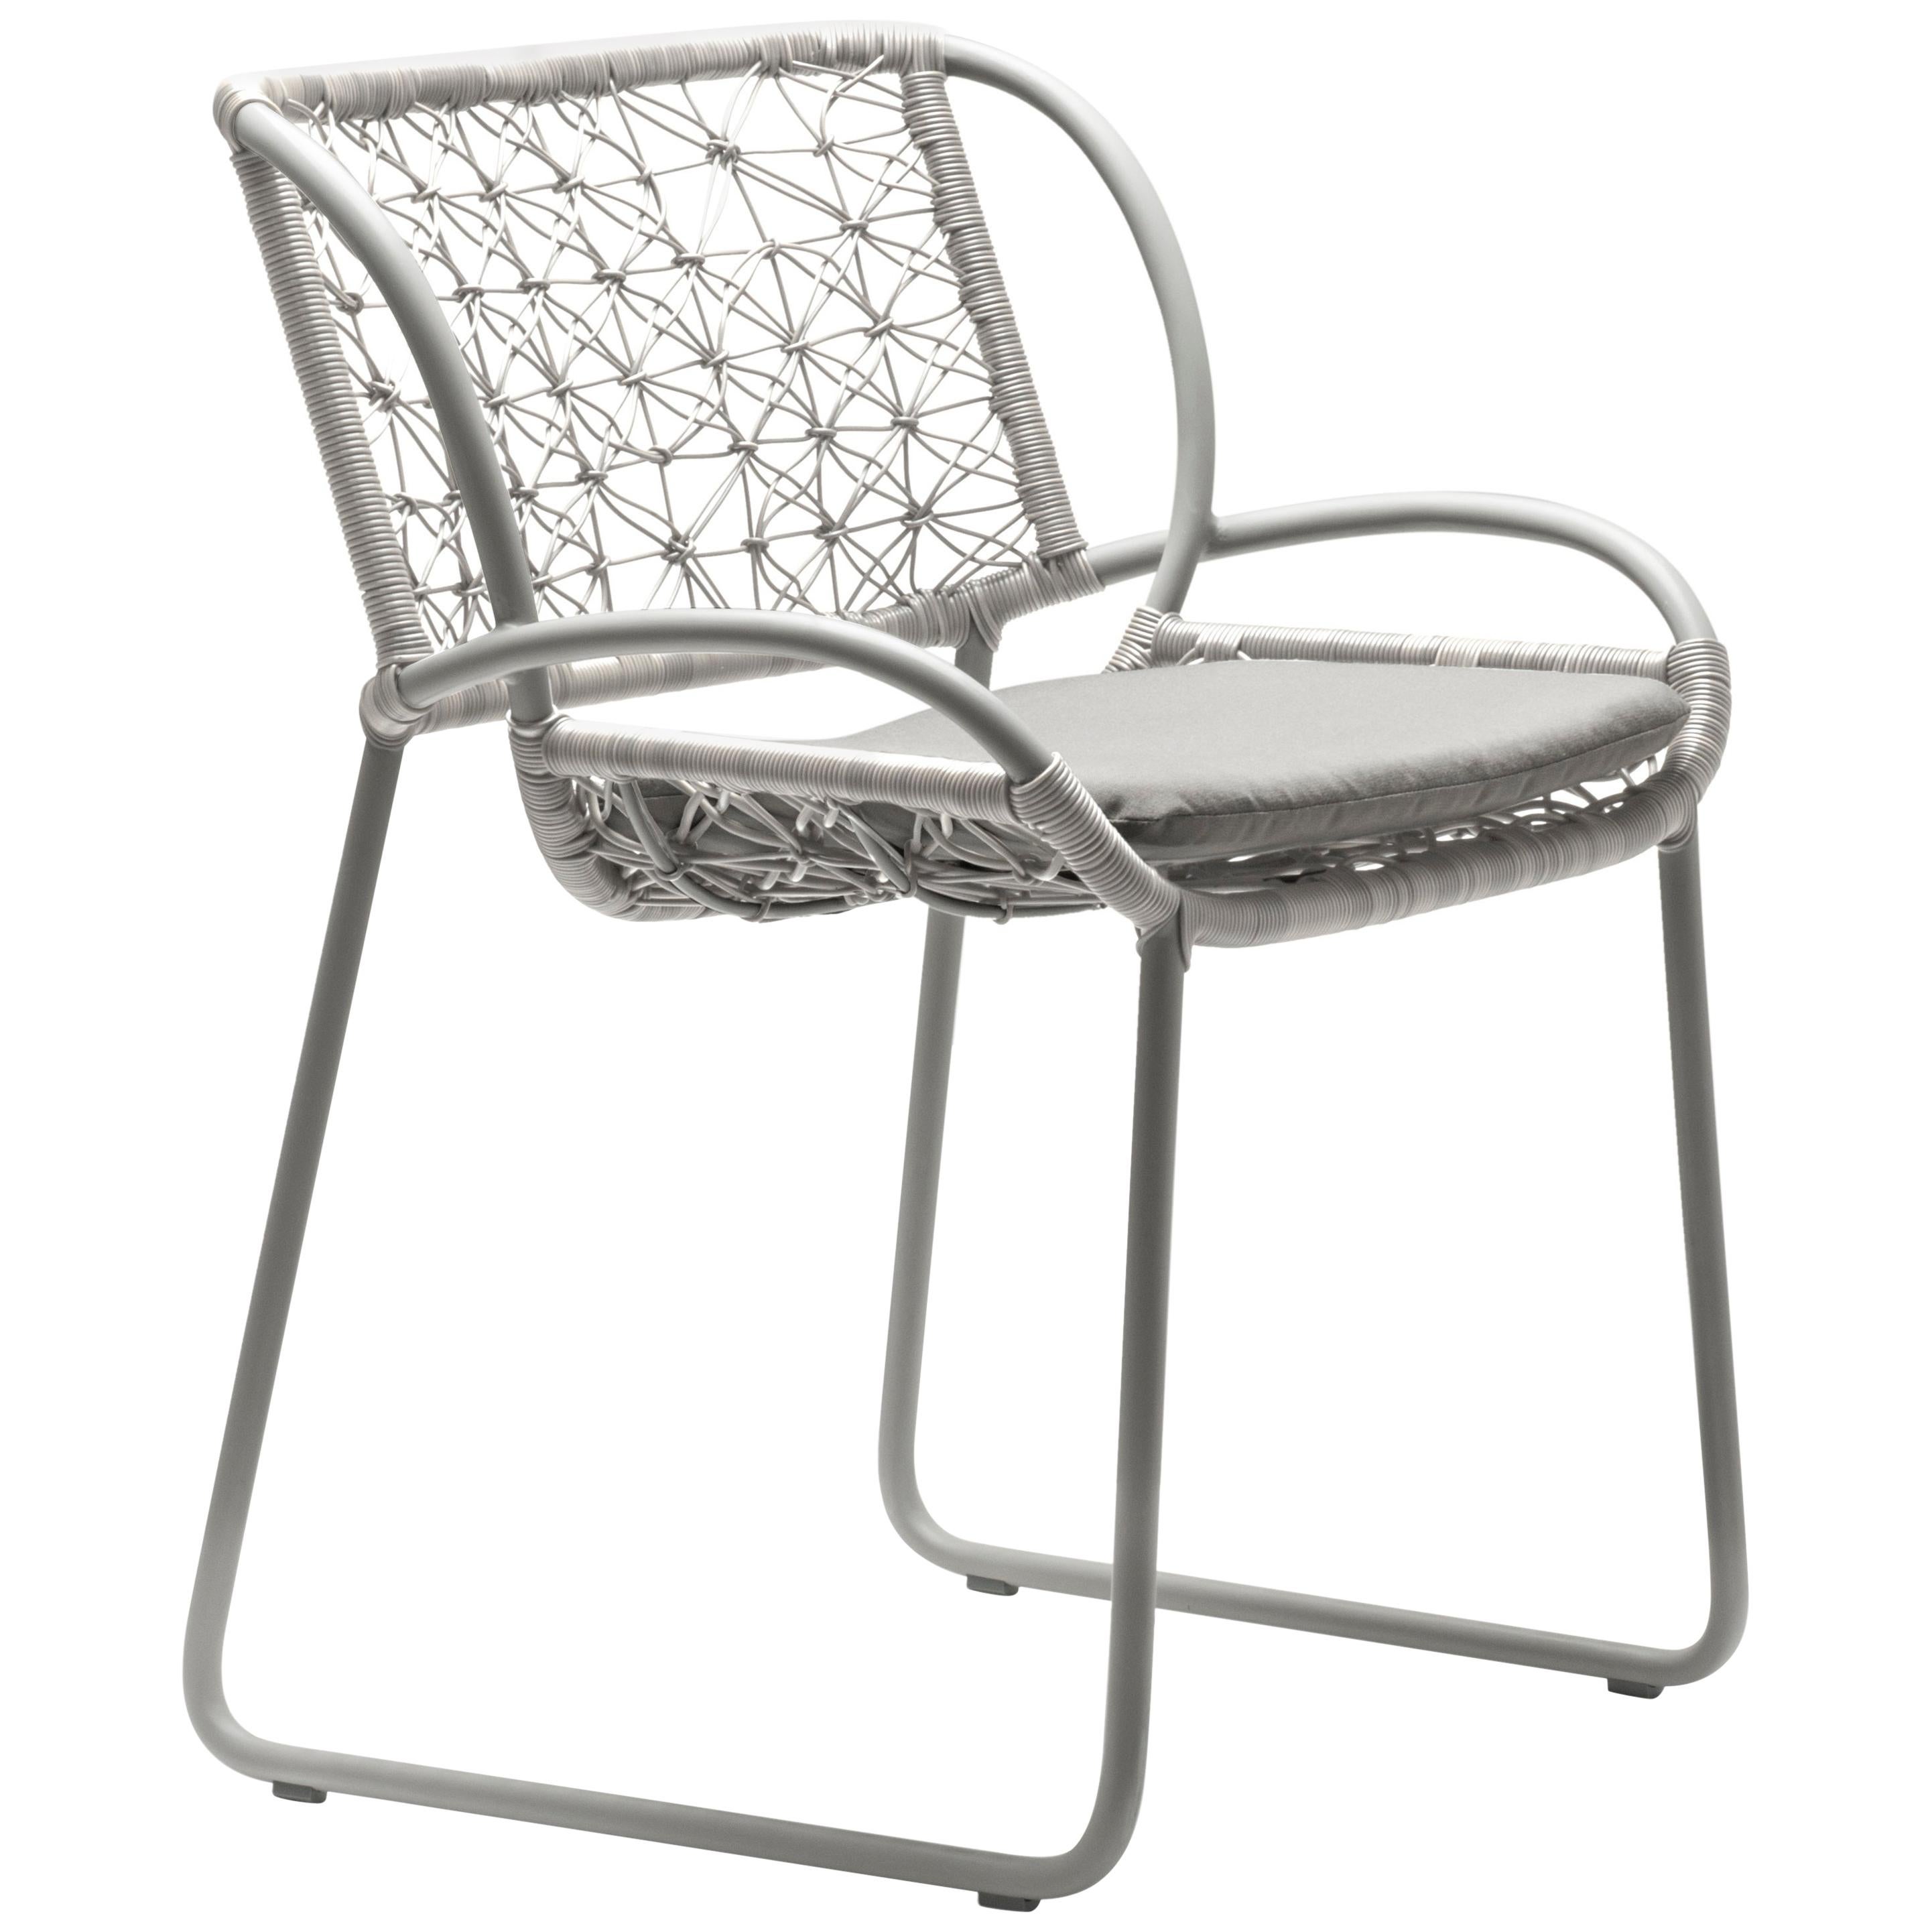 Adesso Pale Grey Armchair by Kenneth Cobonpue